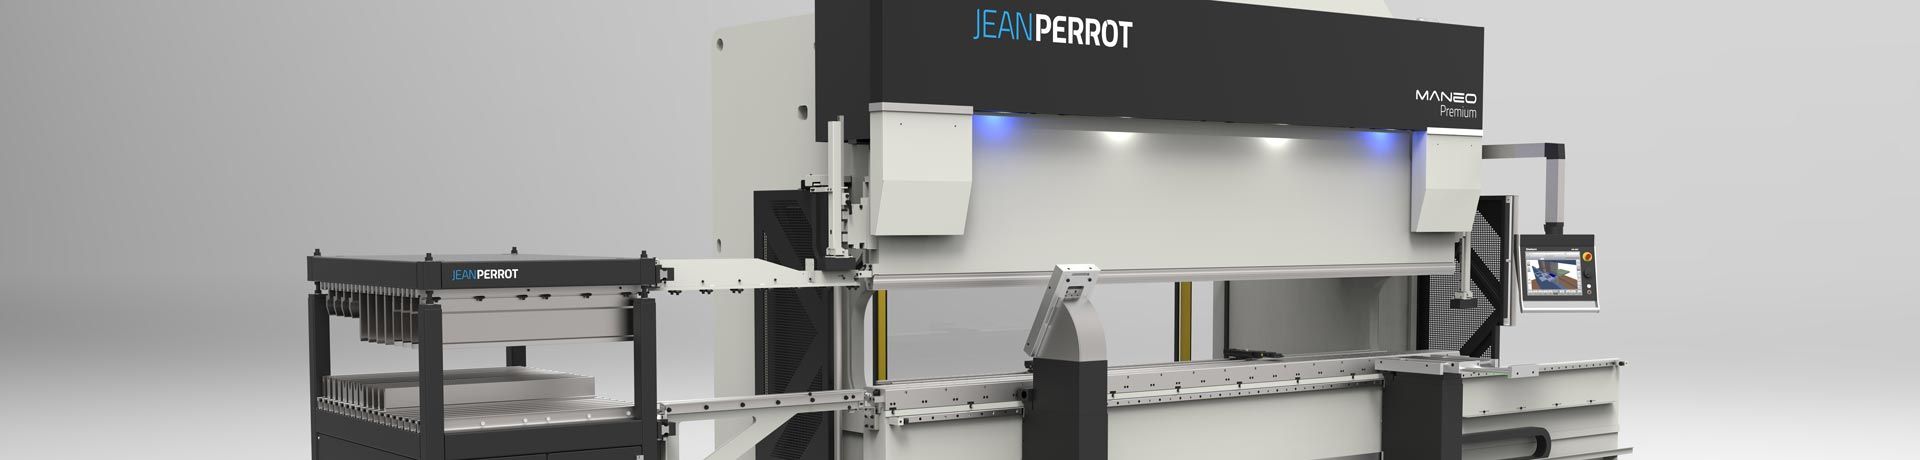 JEAN PERROT, a brand of PINETTE PEI industrial engineering group, designs, manufactures and supplies sheet metal processing equipment : press brakes, automated robotic bending cells, shears, tube & profile benders, rolling machines, notching machines, punching machines…